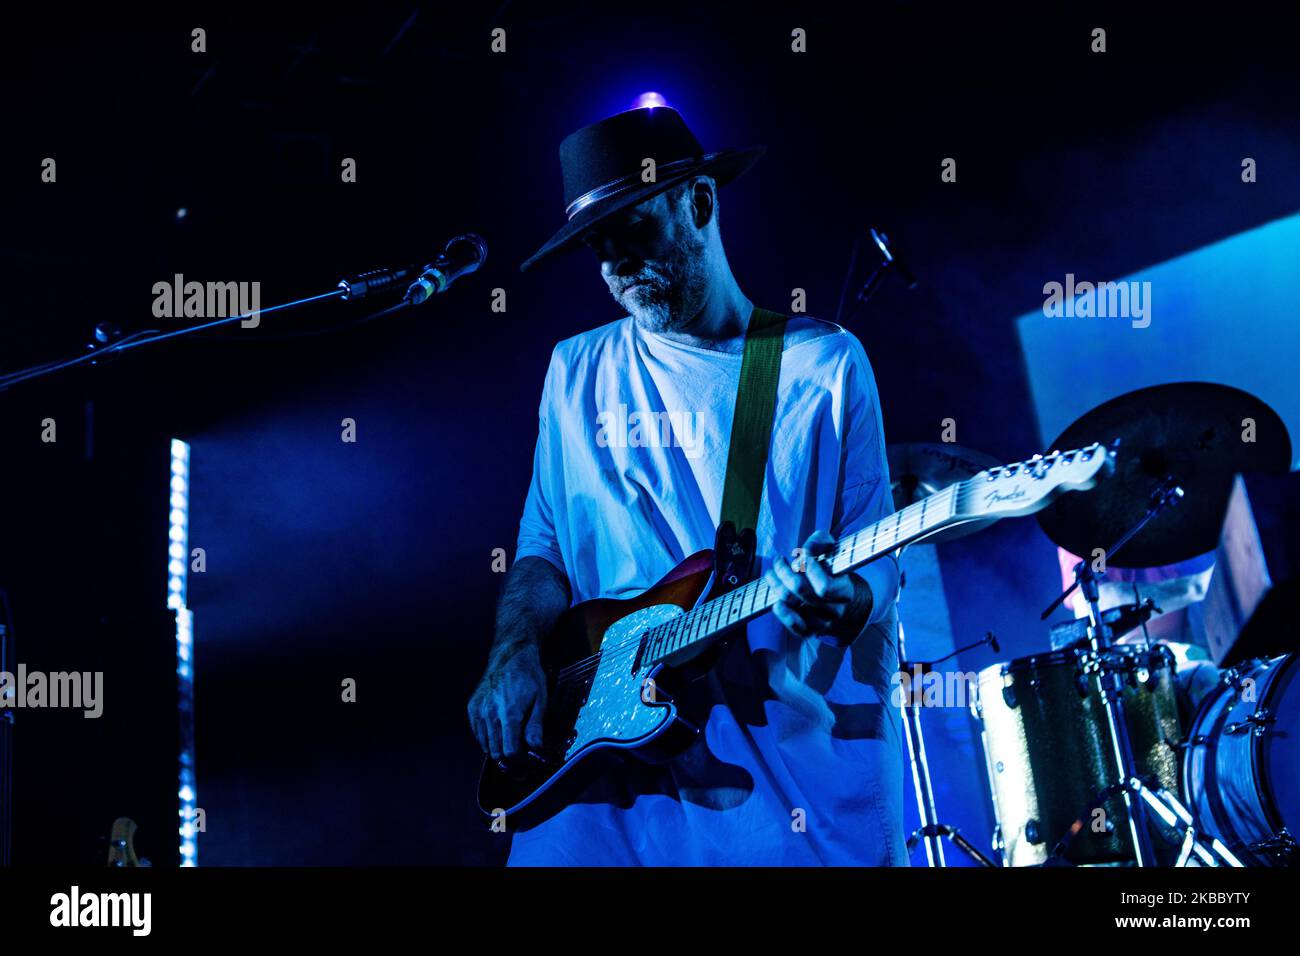 Al Doyle of English synth-pop band Hot chip performs at Alcatraz in Milano, Italy, on November 30 2019. The group consists of multi-instrumentalists Alexis Taylor, and Felix Martin. They are occasionally supplemented by Rob Smoughton and Sarah Jones for live performances and studio recordings. The group primarily produces music in the synth-pop and alternative dance genres, drawing influences from house and disco. (Photo by Mairo Cinquetti/NurPhoto) Stock Photo